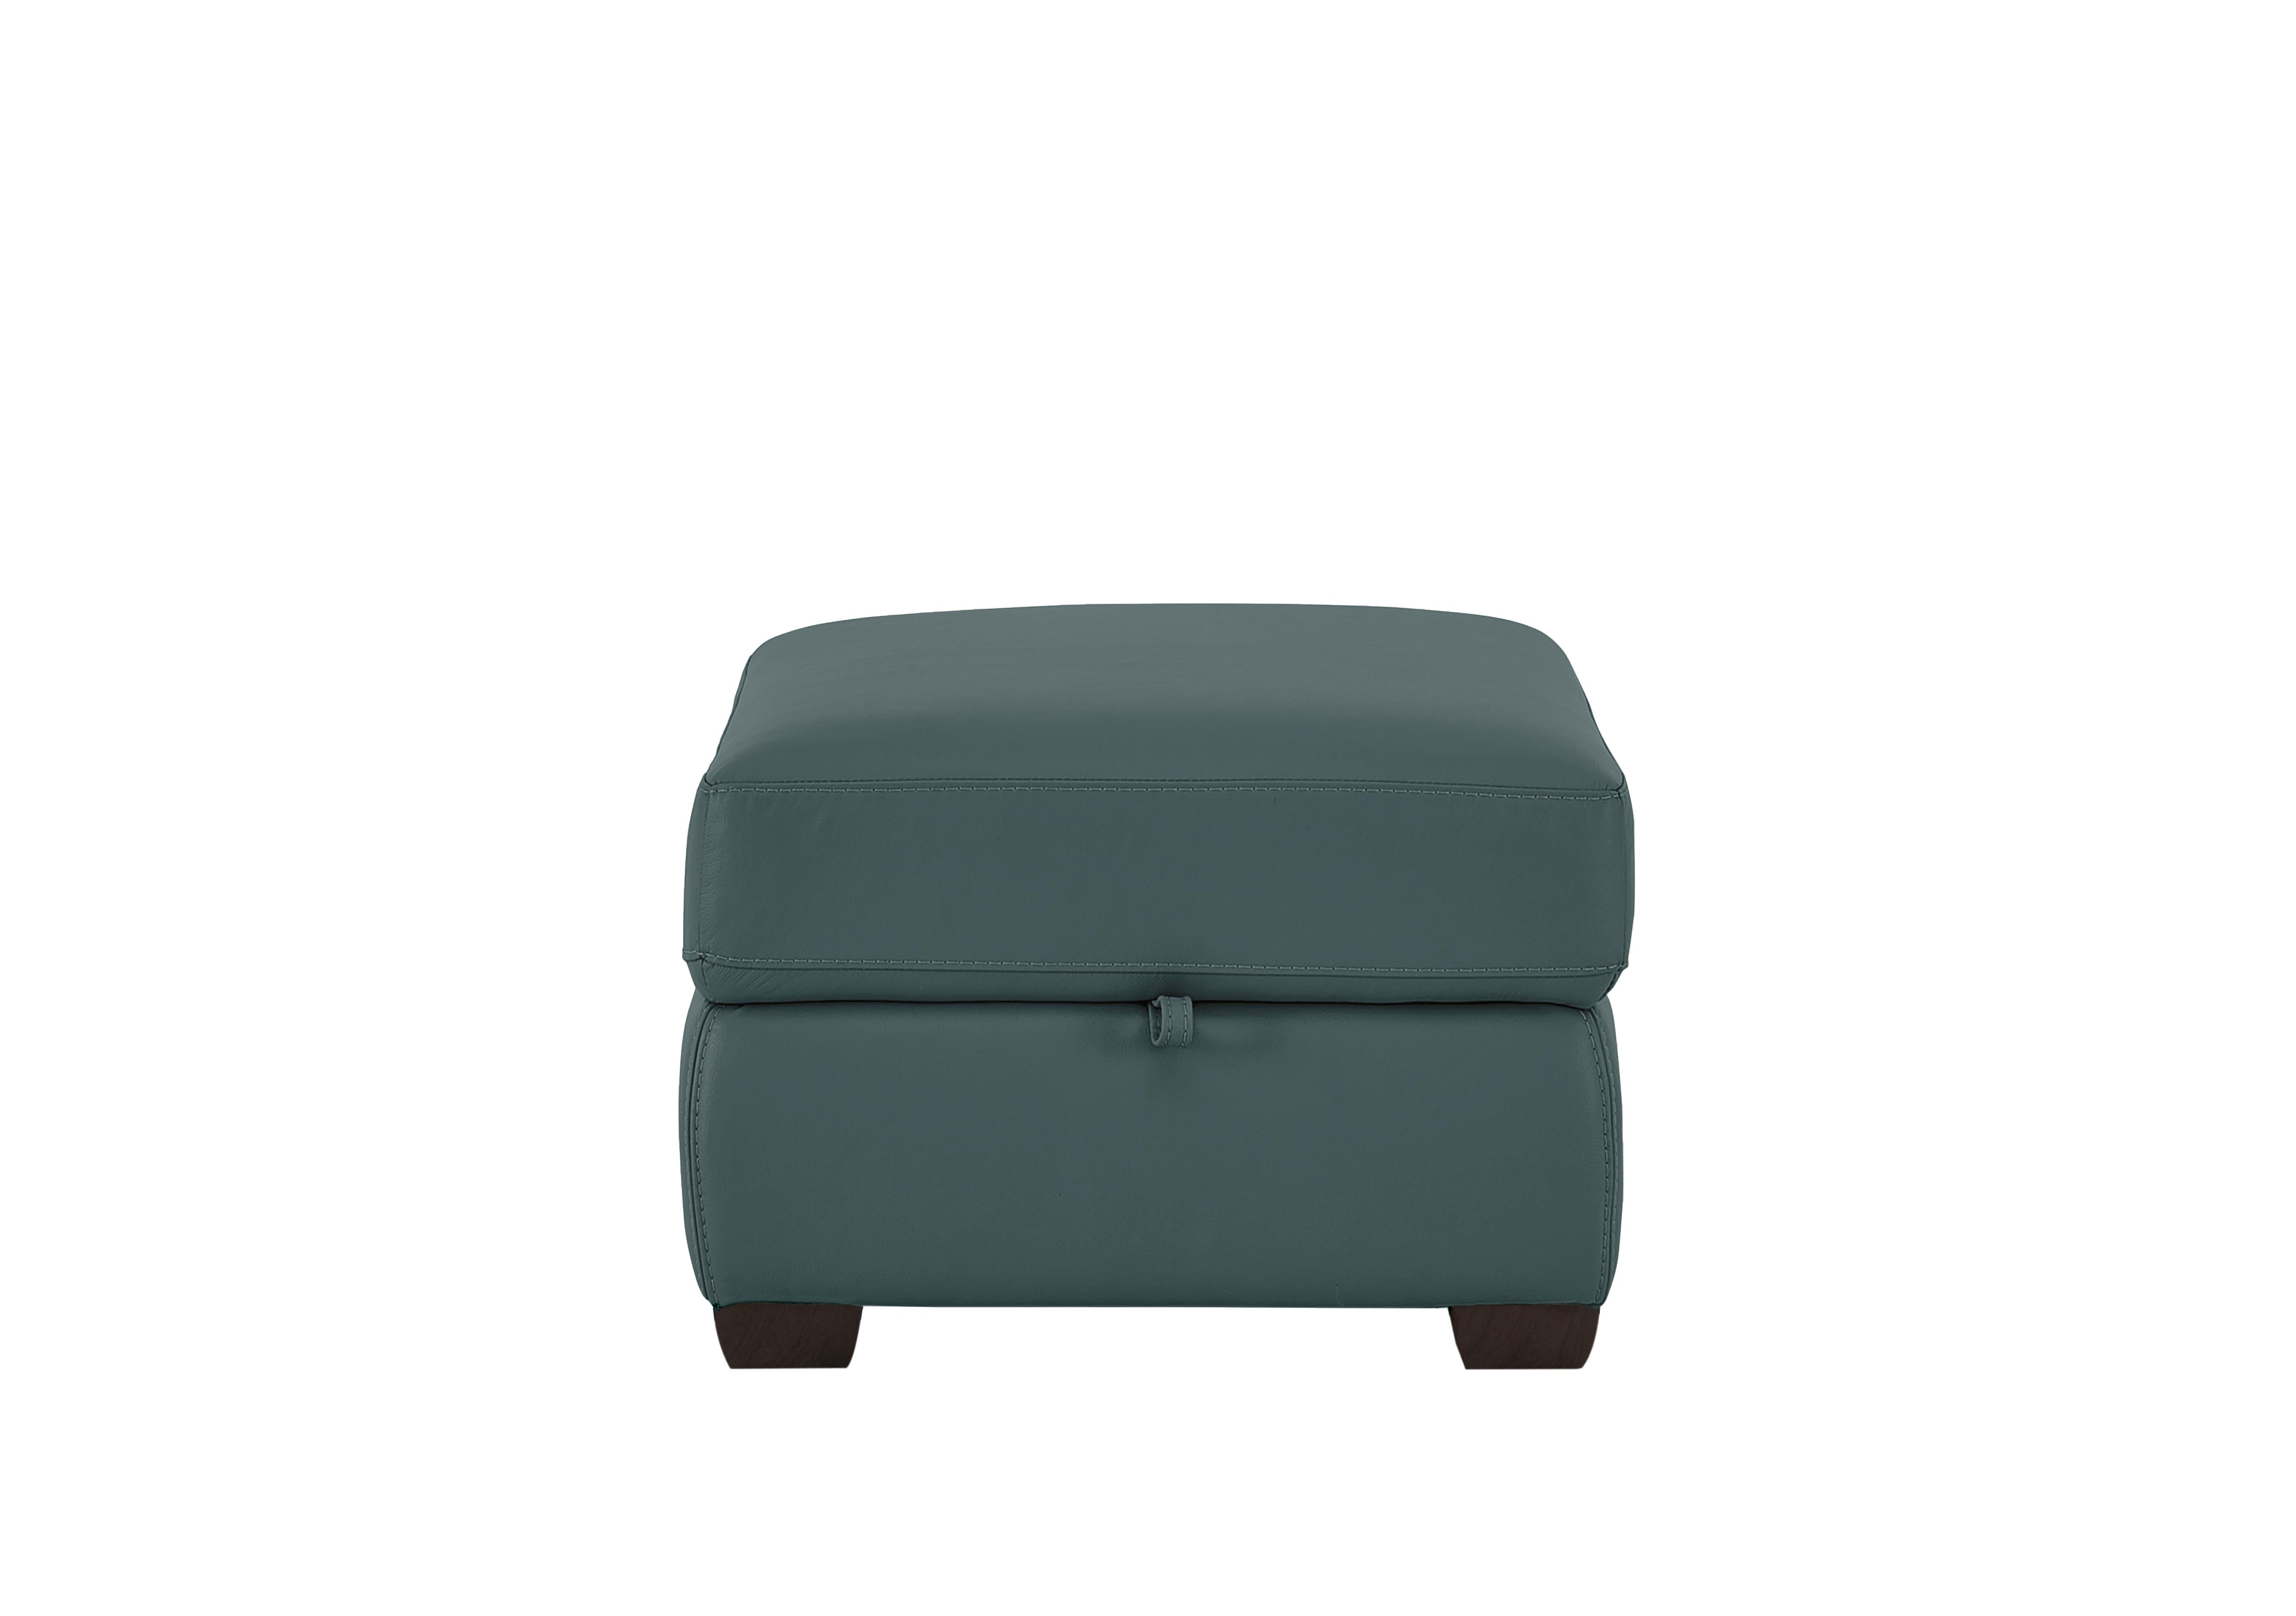 Chicago Leather Storage Stool in Bv-301e Lake Green on Furniture Village